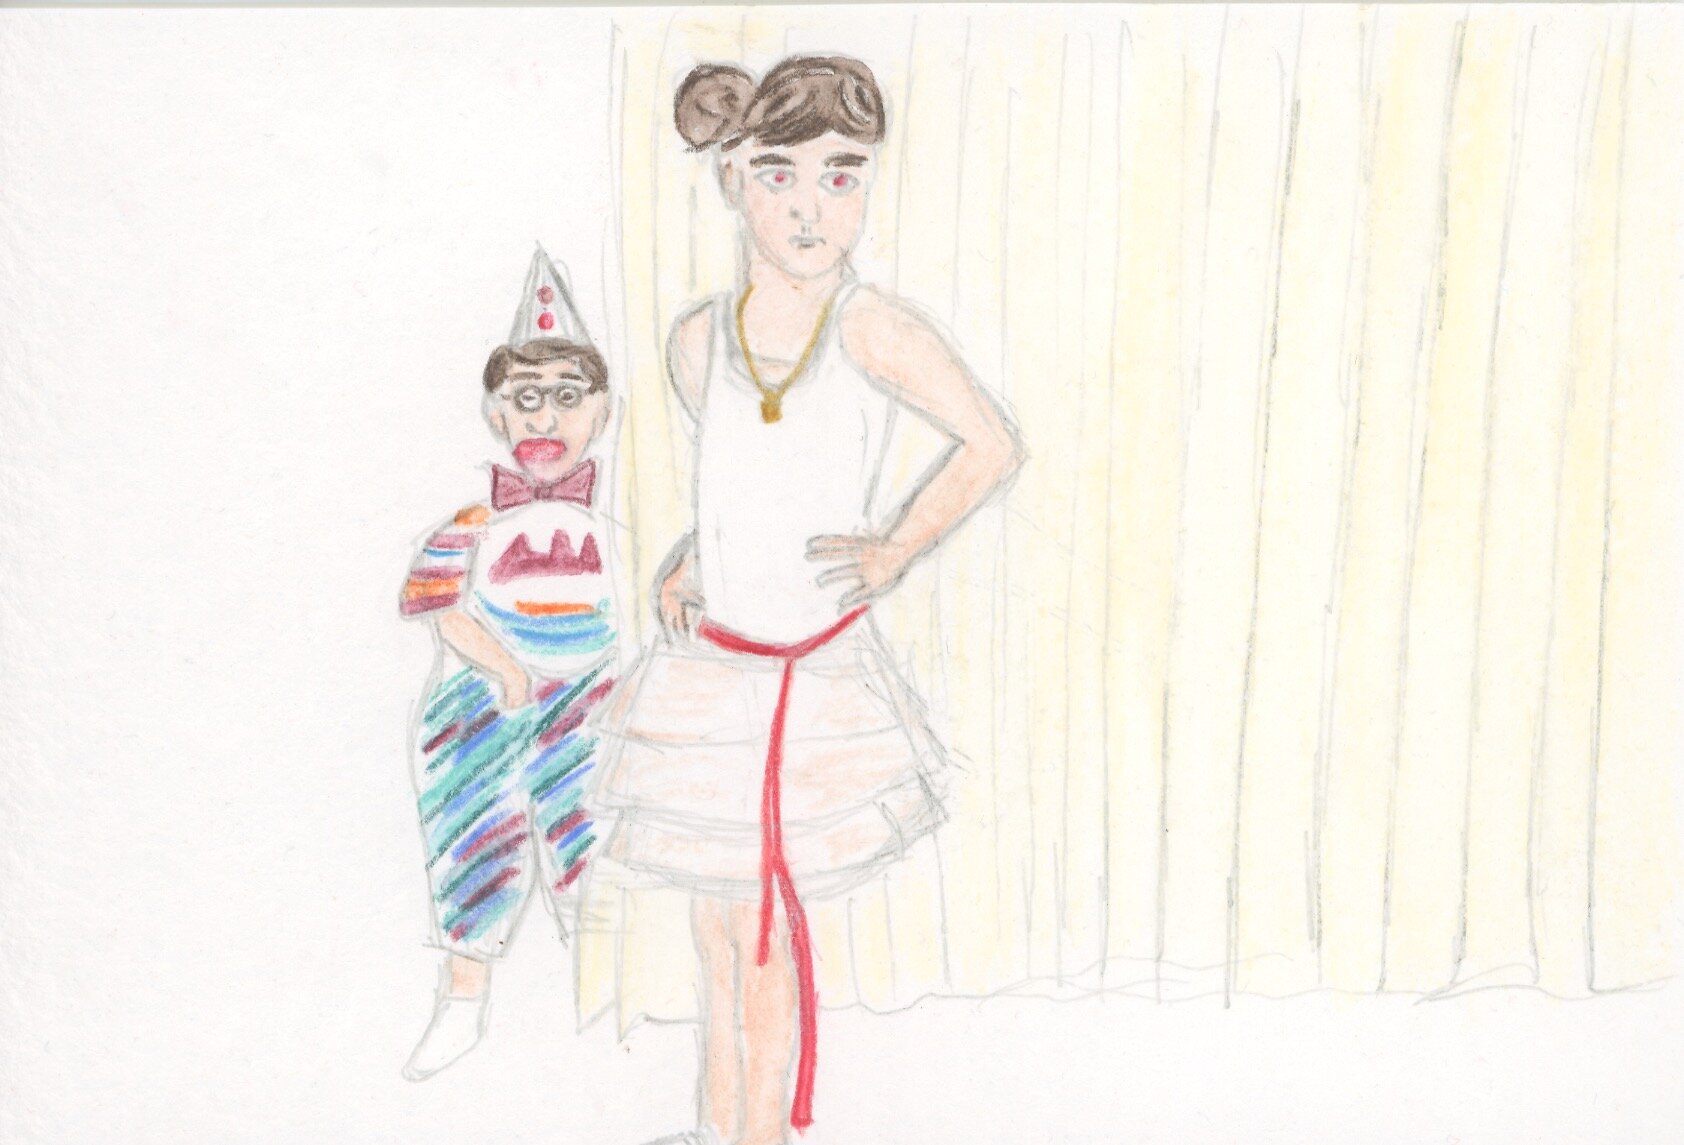 Little girl dressed as a ballerina and a little boy as a clown on their last day of kindergarten, 17.8 x 12.7 cm,  2021